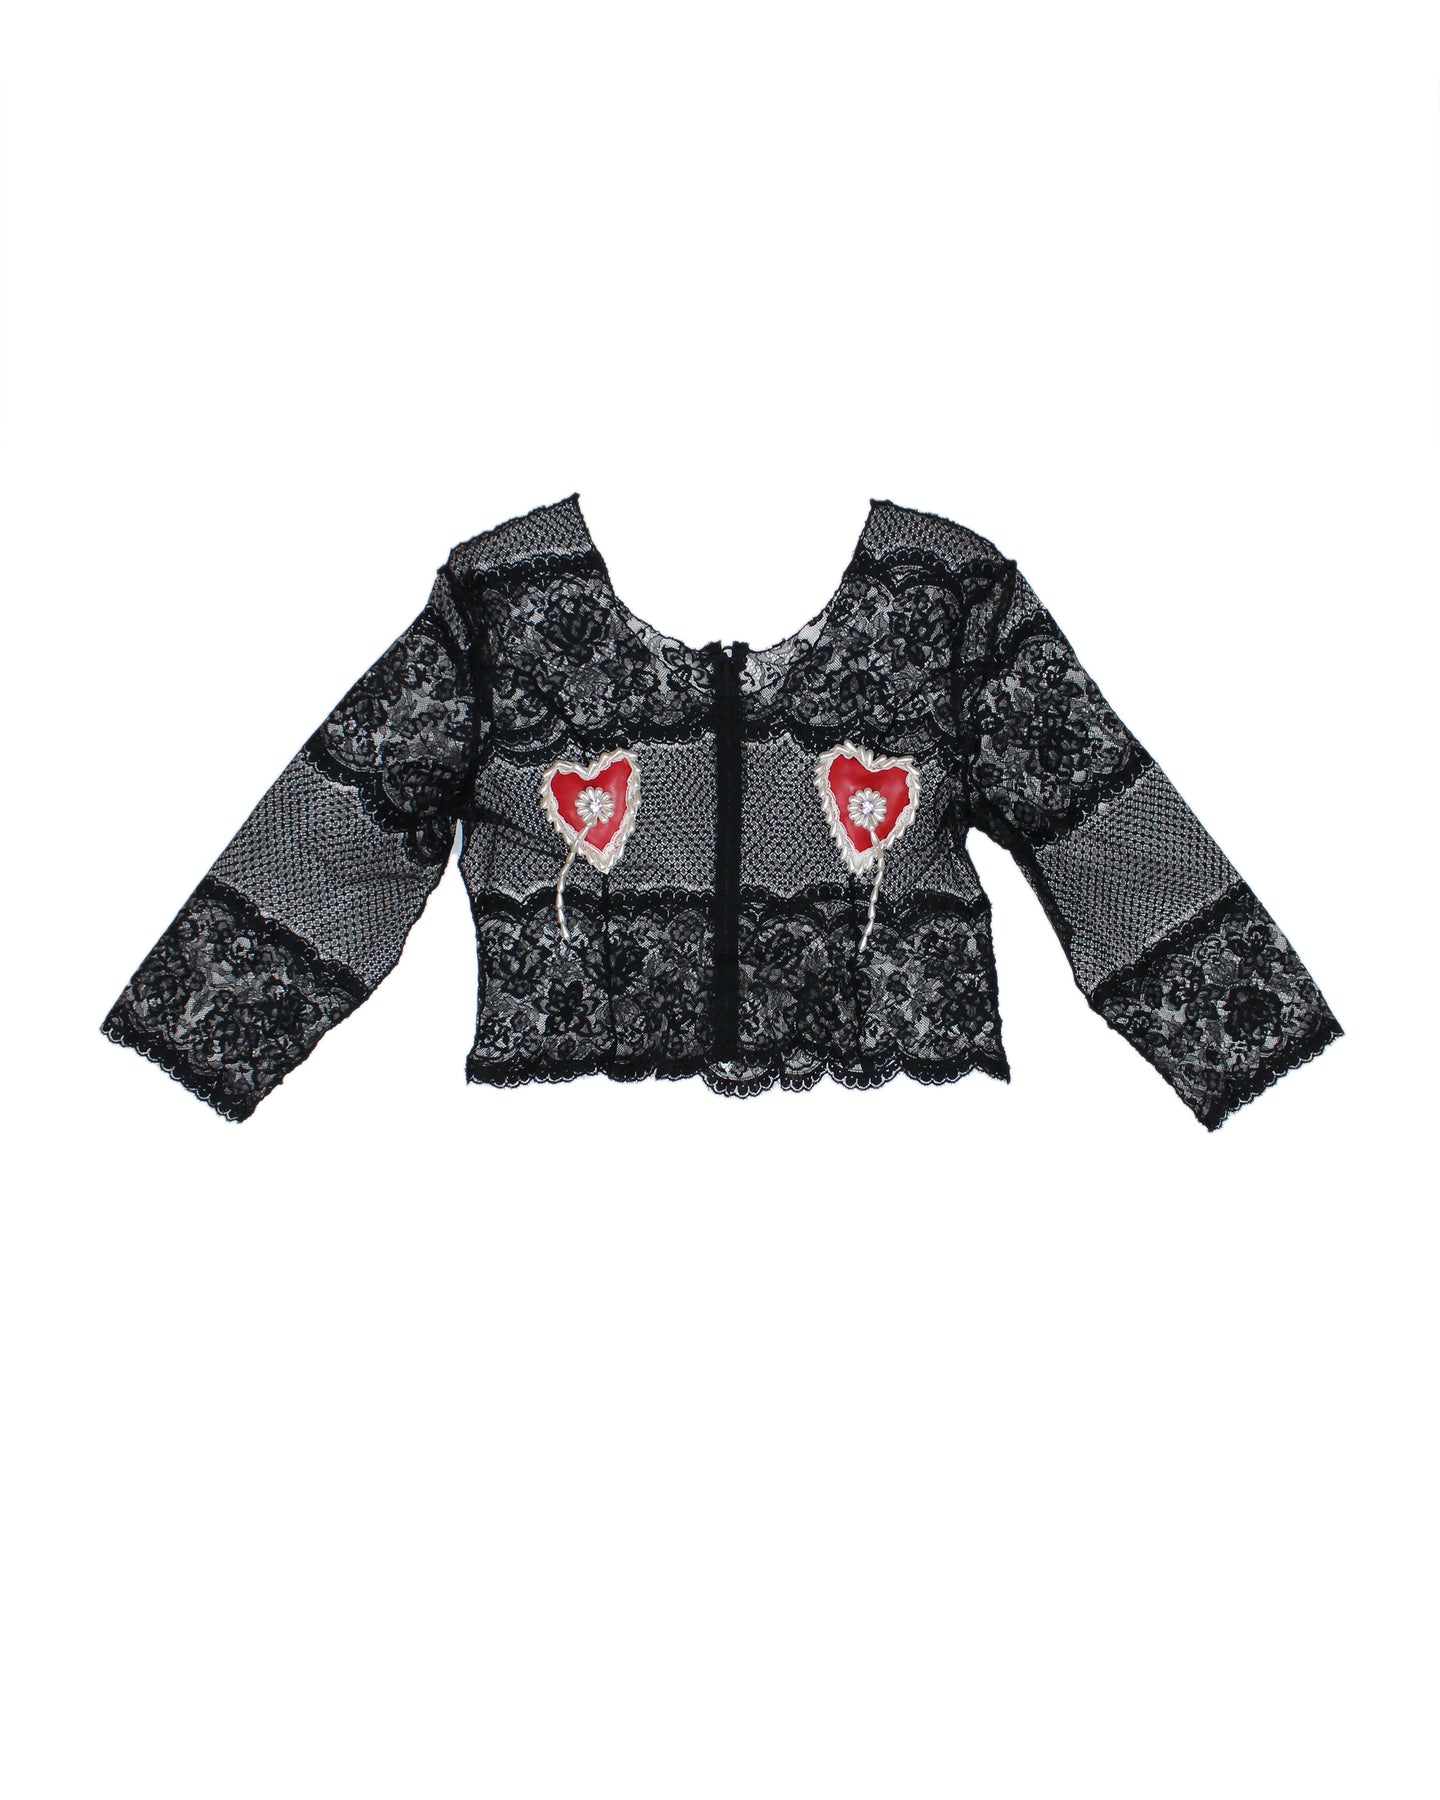 009 Two of Hearts Black Lace Blouse